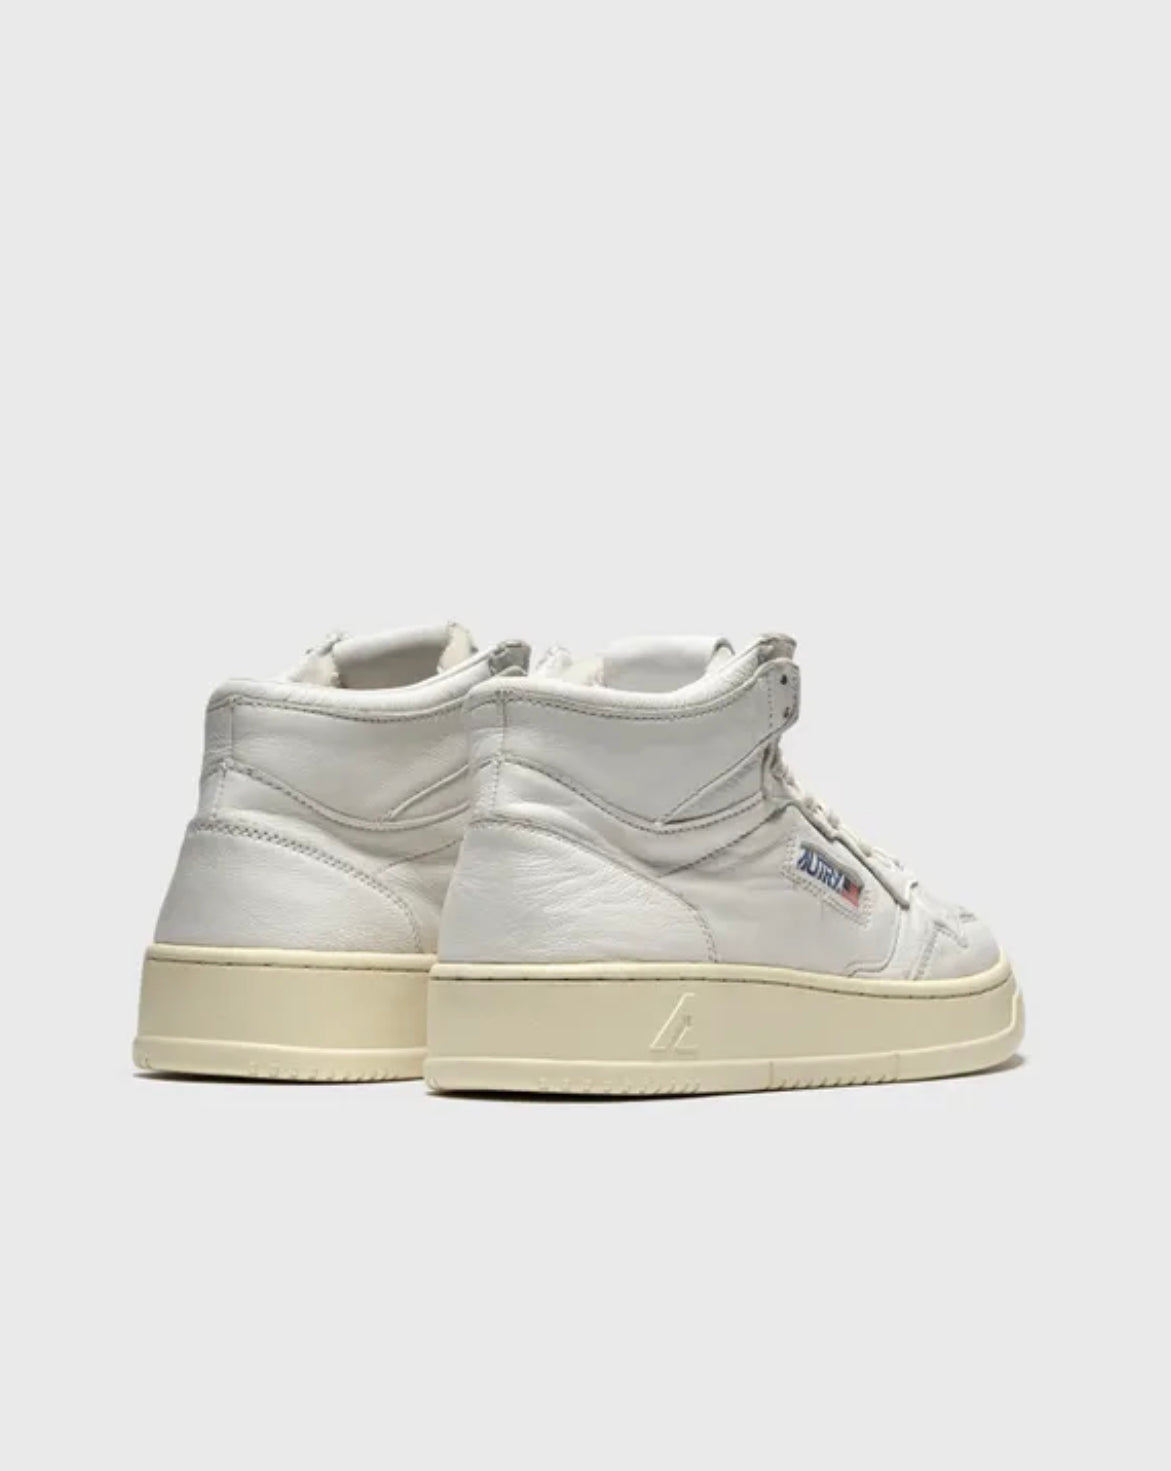 Autry Action Shoes Mens Hi Top Leather White (Excluded from discount codes) , Trainers, Autry, Working Title